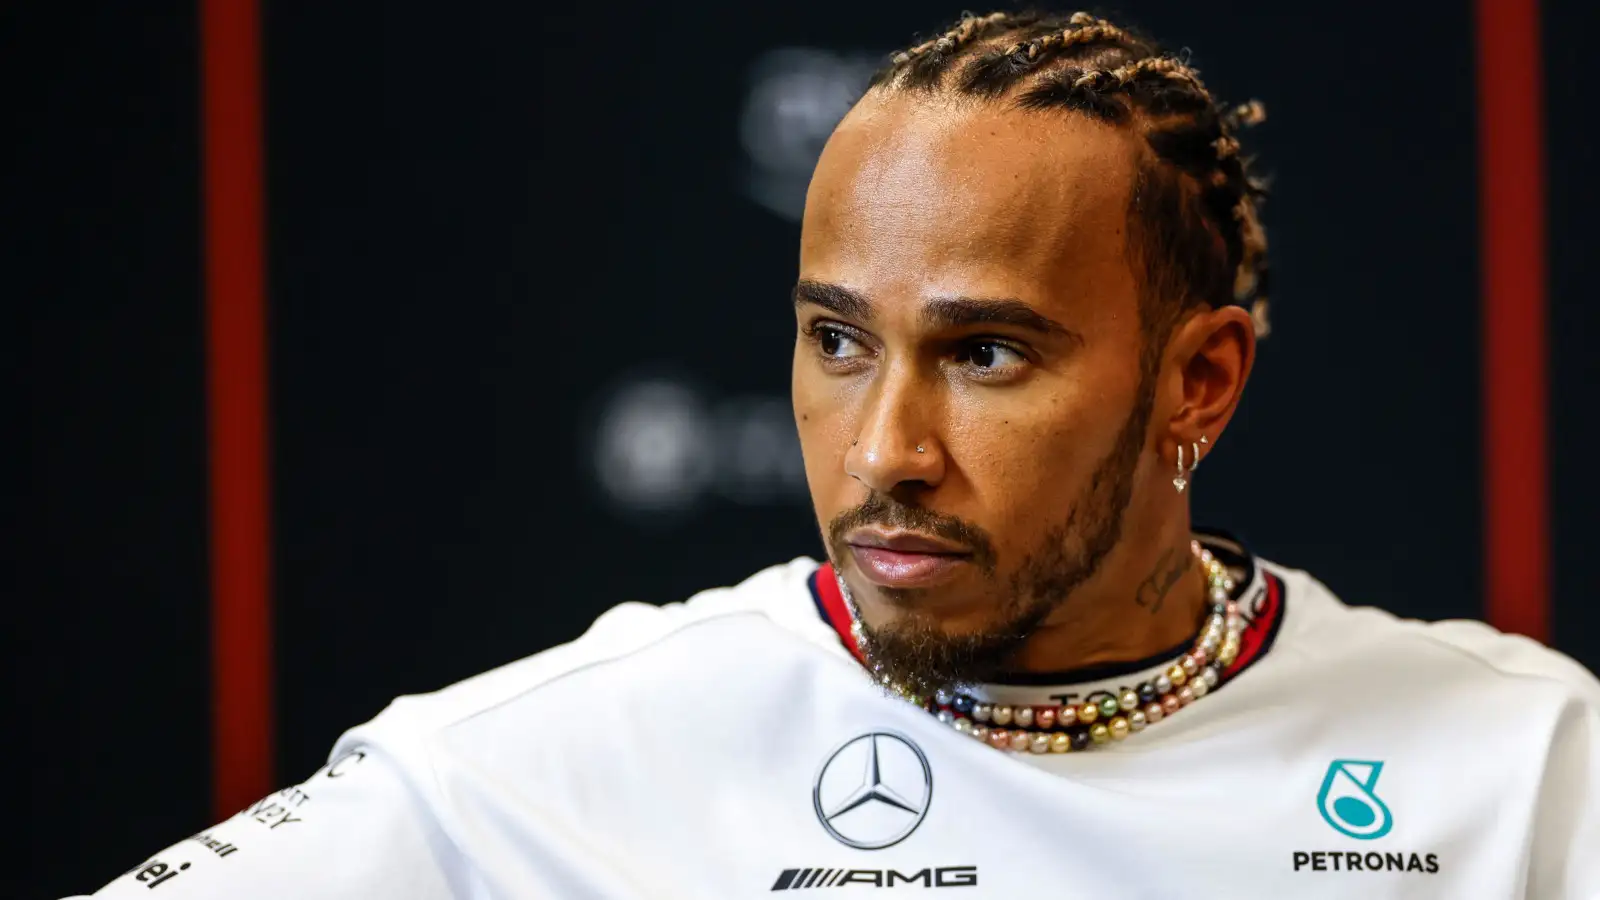 Mercedes driver Lewis Hamilton looking serious in a press conference.